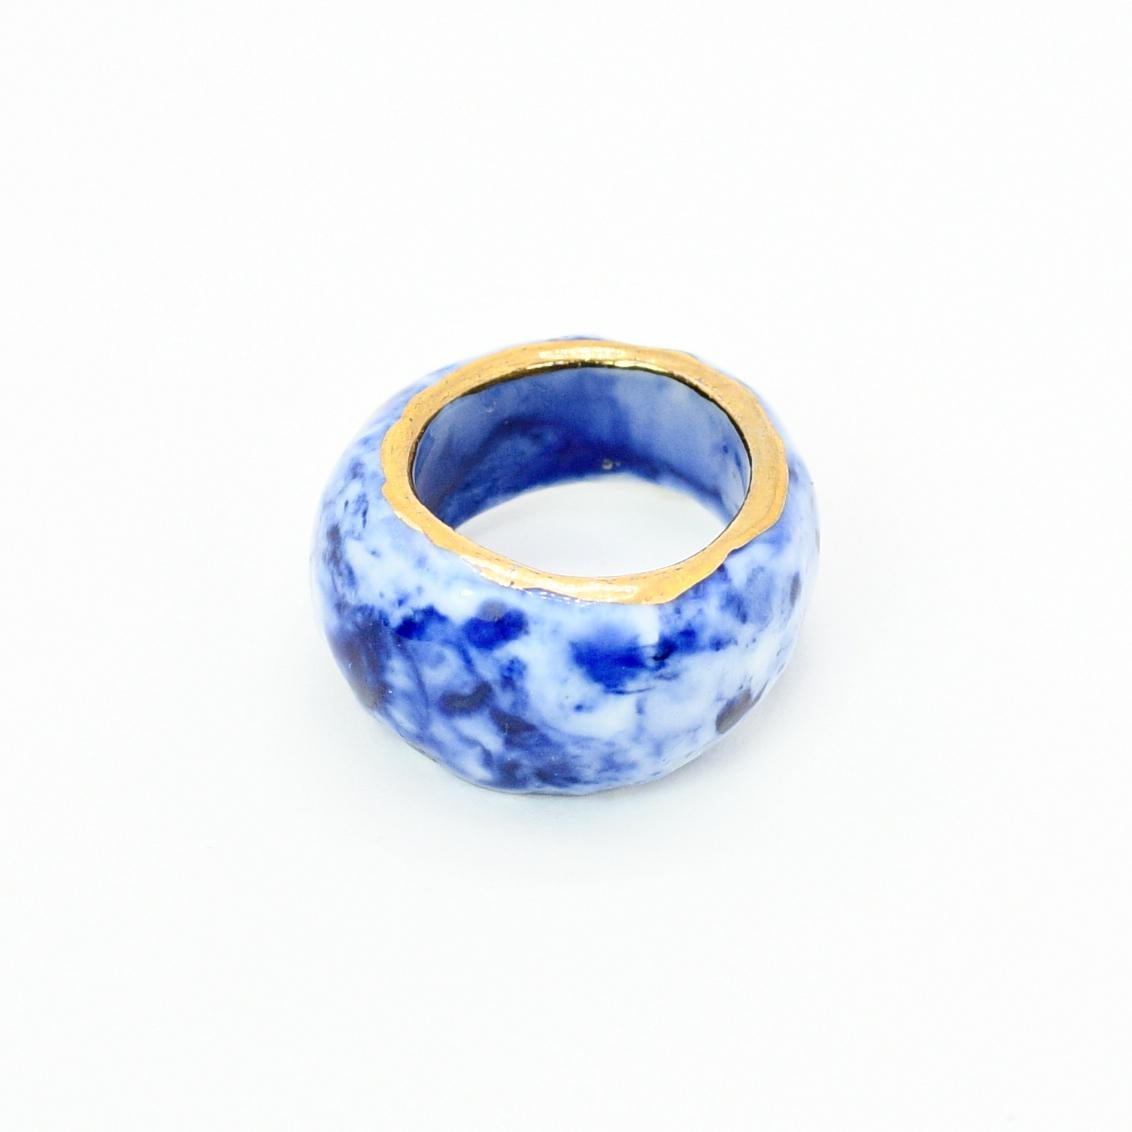 Porcelain  24K gold  Handmade in London 

Introducing the GILA Porcelain Ring, a harmonious fusion of sophistication and opulence. Meticulously crafted from premium porcelain, this exquisite piece features a captivating cobalt blue glaze reminiscent